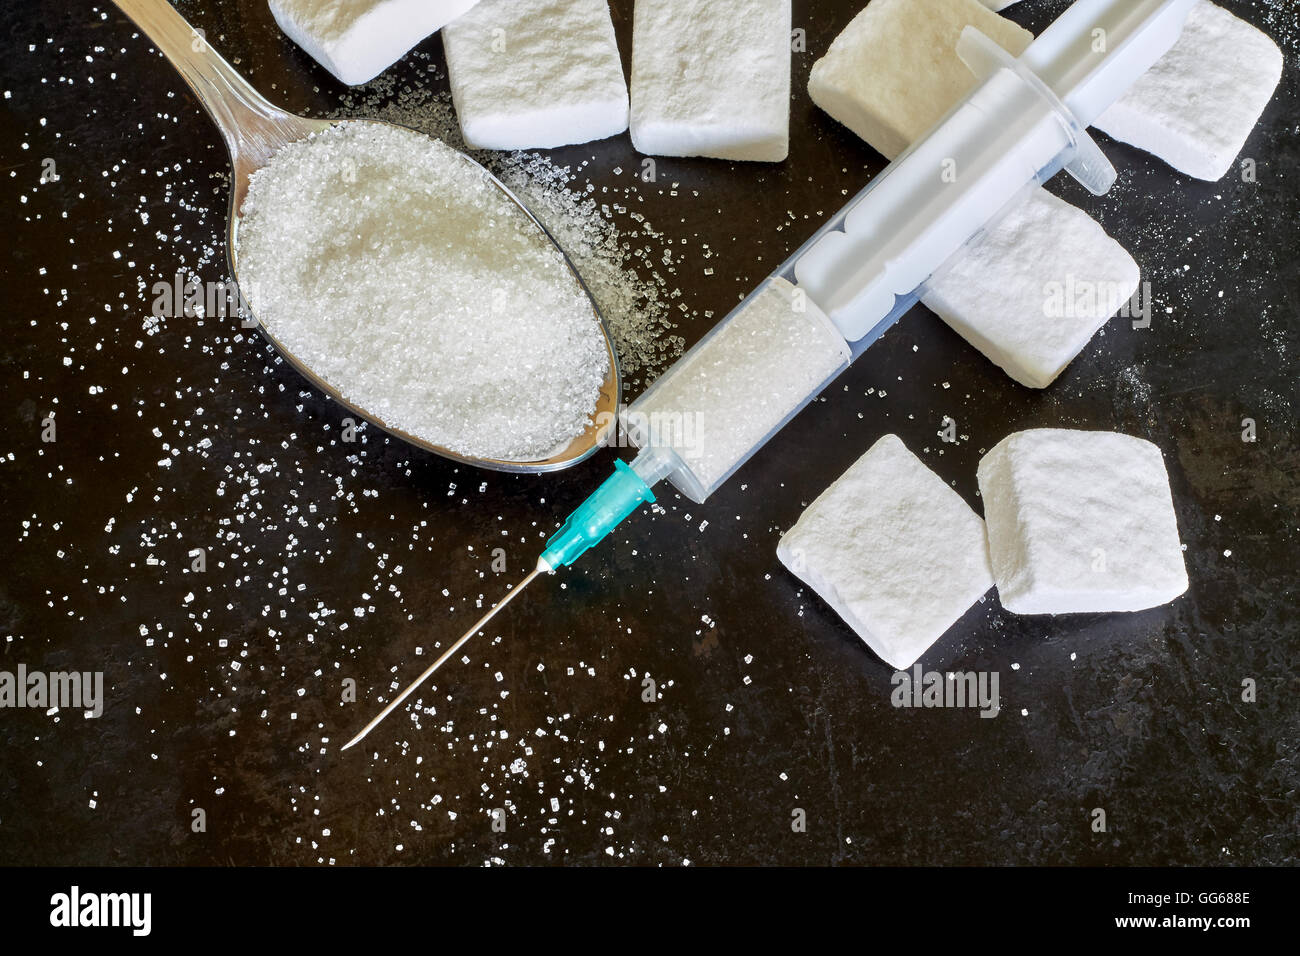 Injection with needle filled with sugar on black rustic background. Concept image for sugar addiction. Top view with copy space Stock Photo